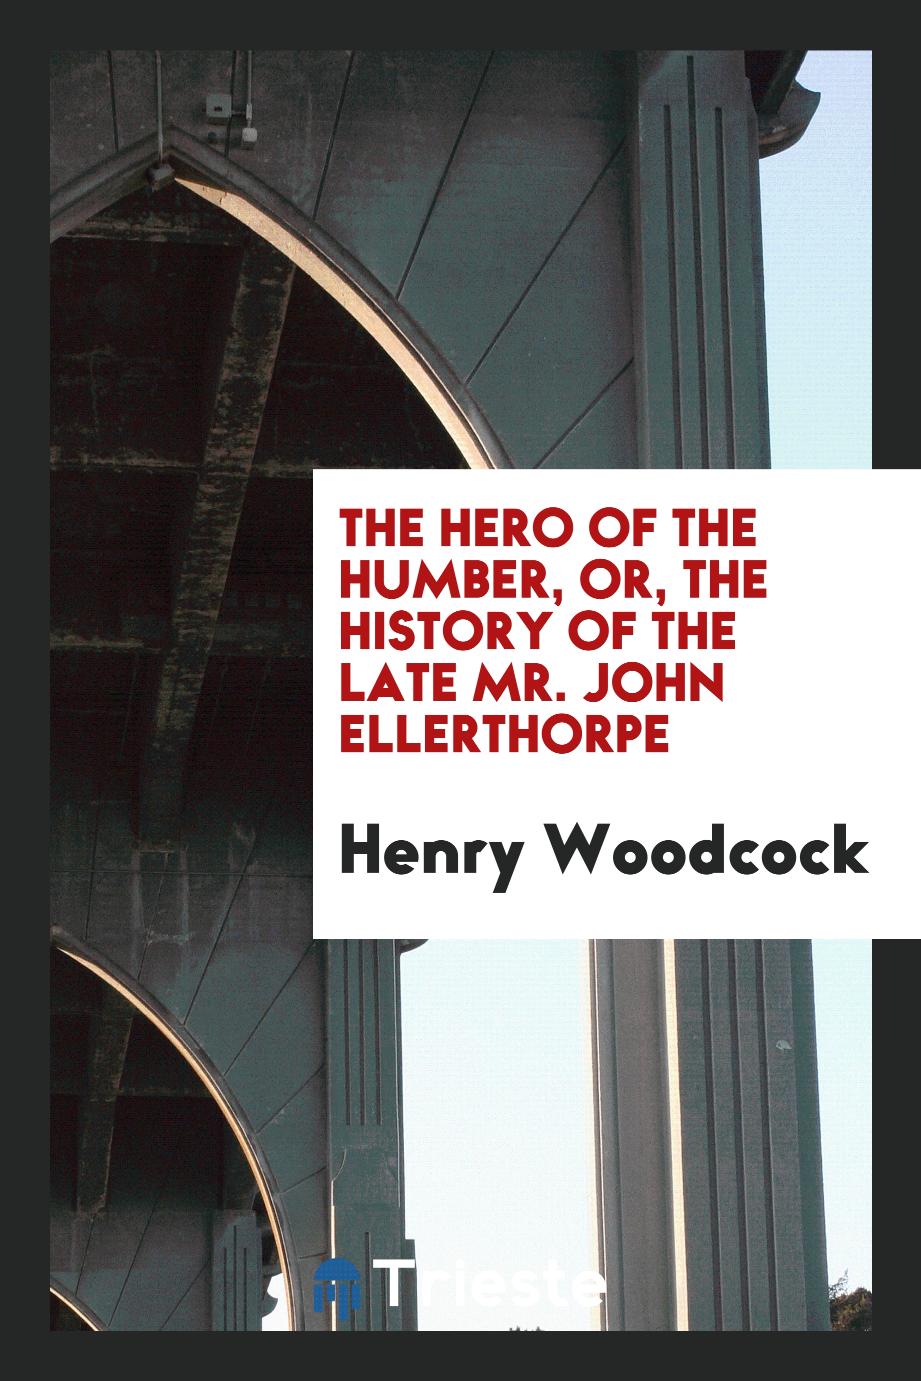 The Hero of the Humber, or, the History of the Late Mr. John Ellerthorpe